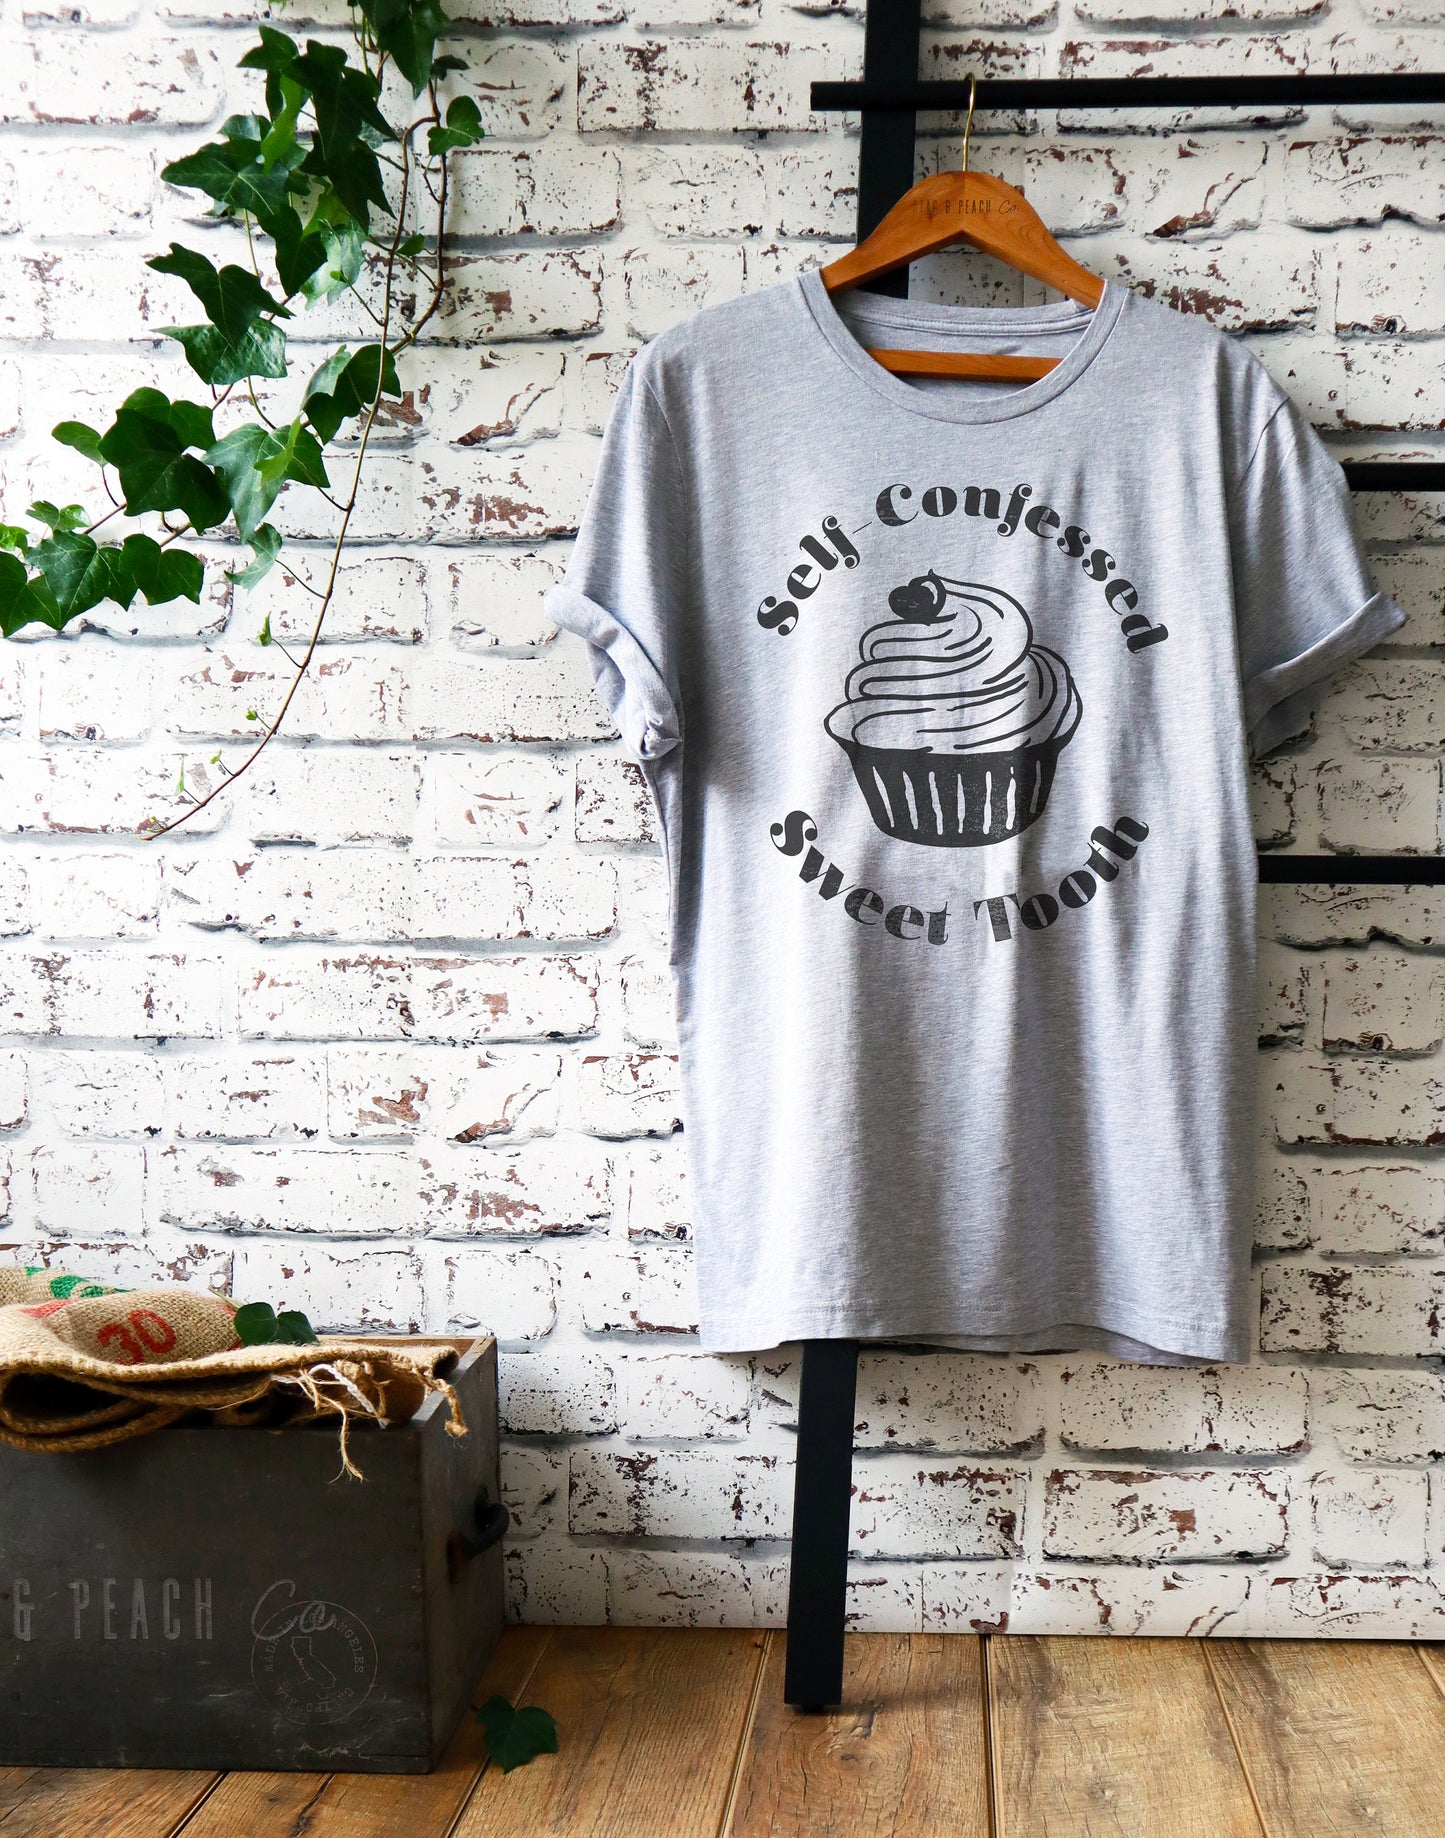 Self-Confessed Sweet Tooth Unisex Shirt - Sweet Tooth Shirt, Cupcake Birthday Party Shirt, Dessert Shirt, Sweet Lover Gift, Foodie Gift